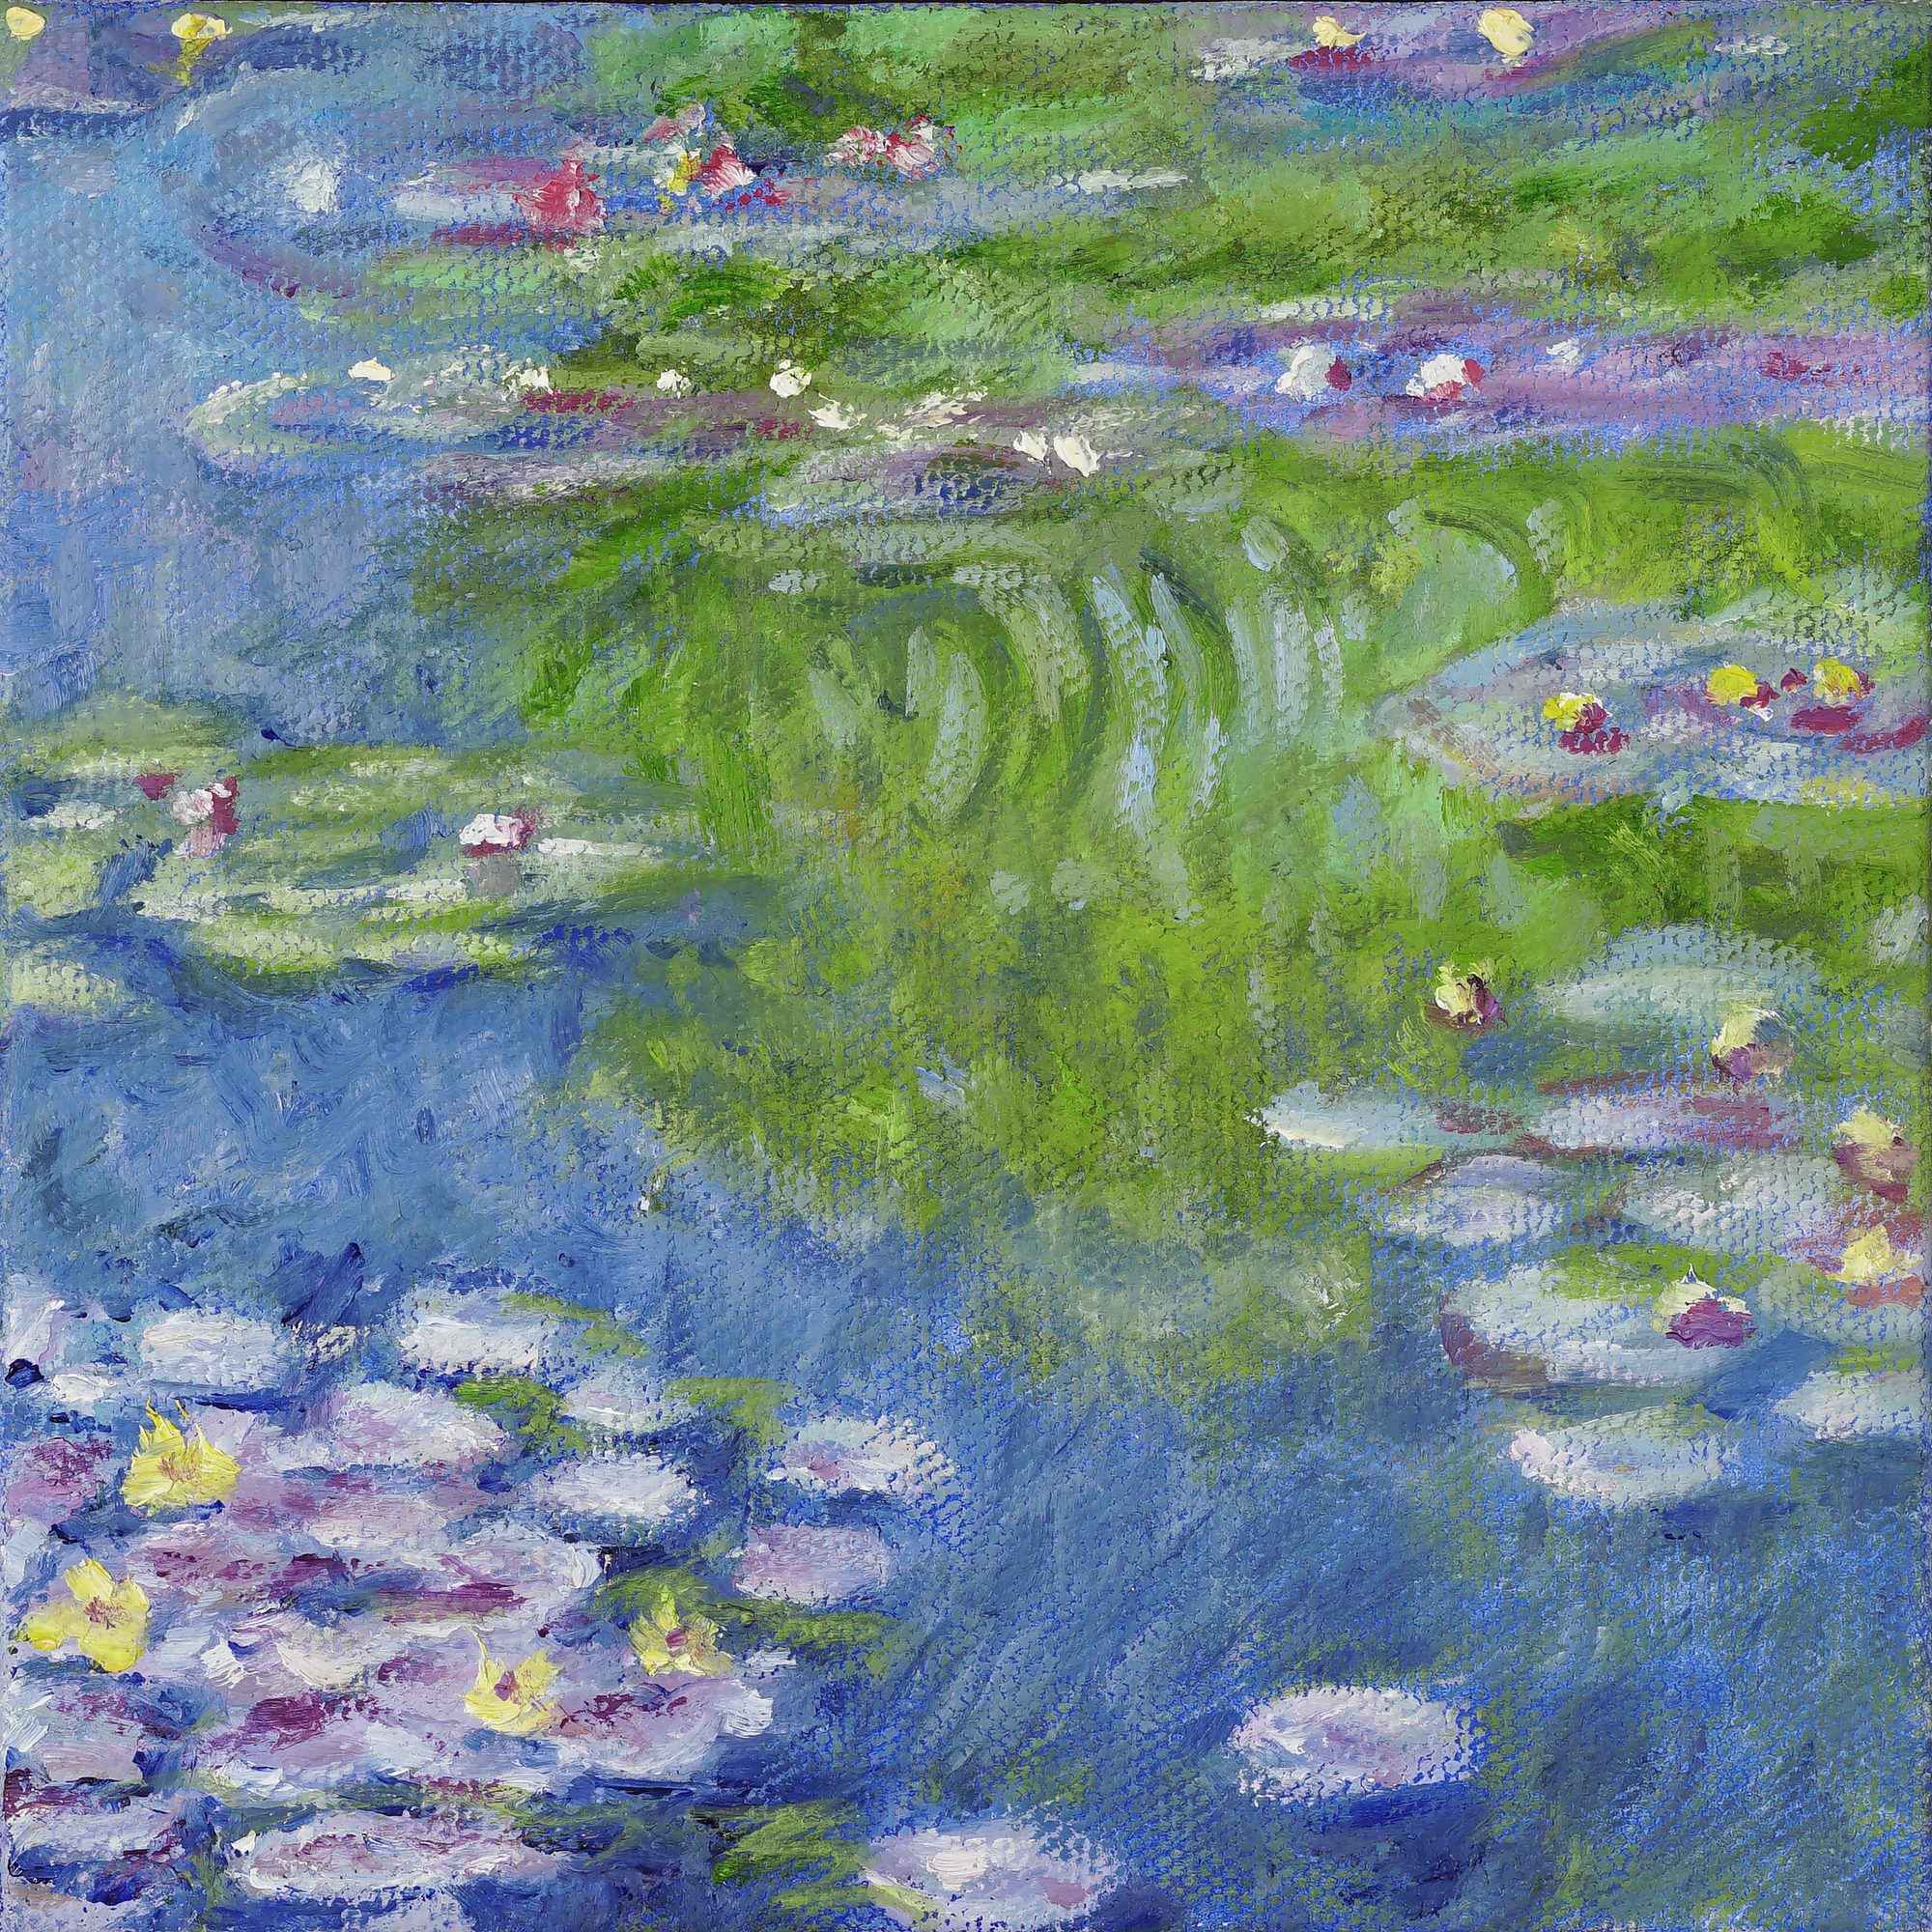 Cindy Sugg, Water Lilies, After Monet